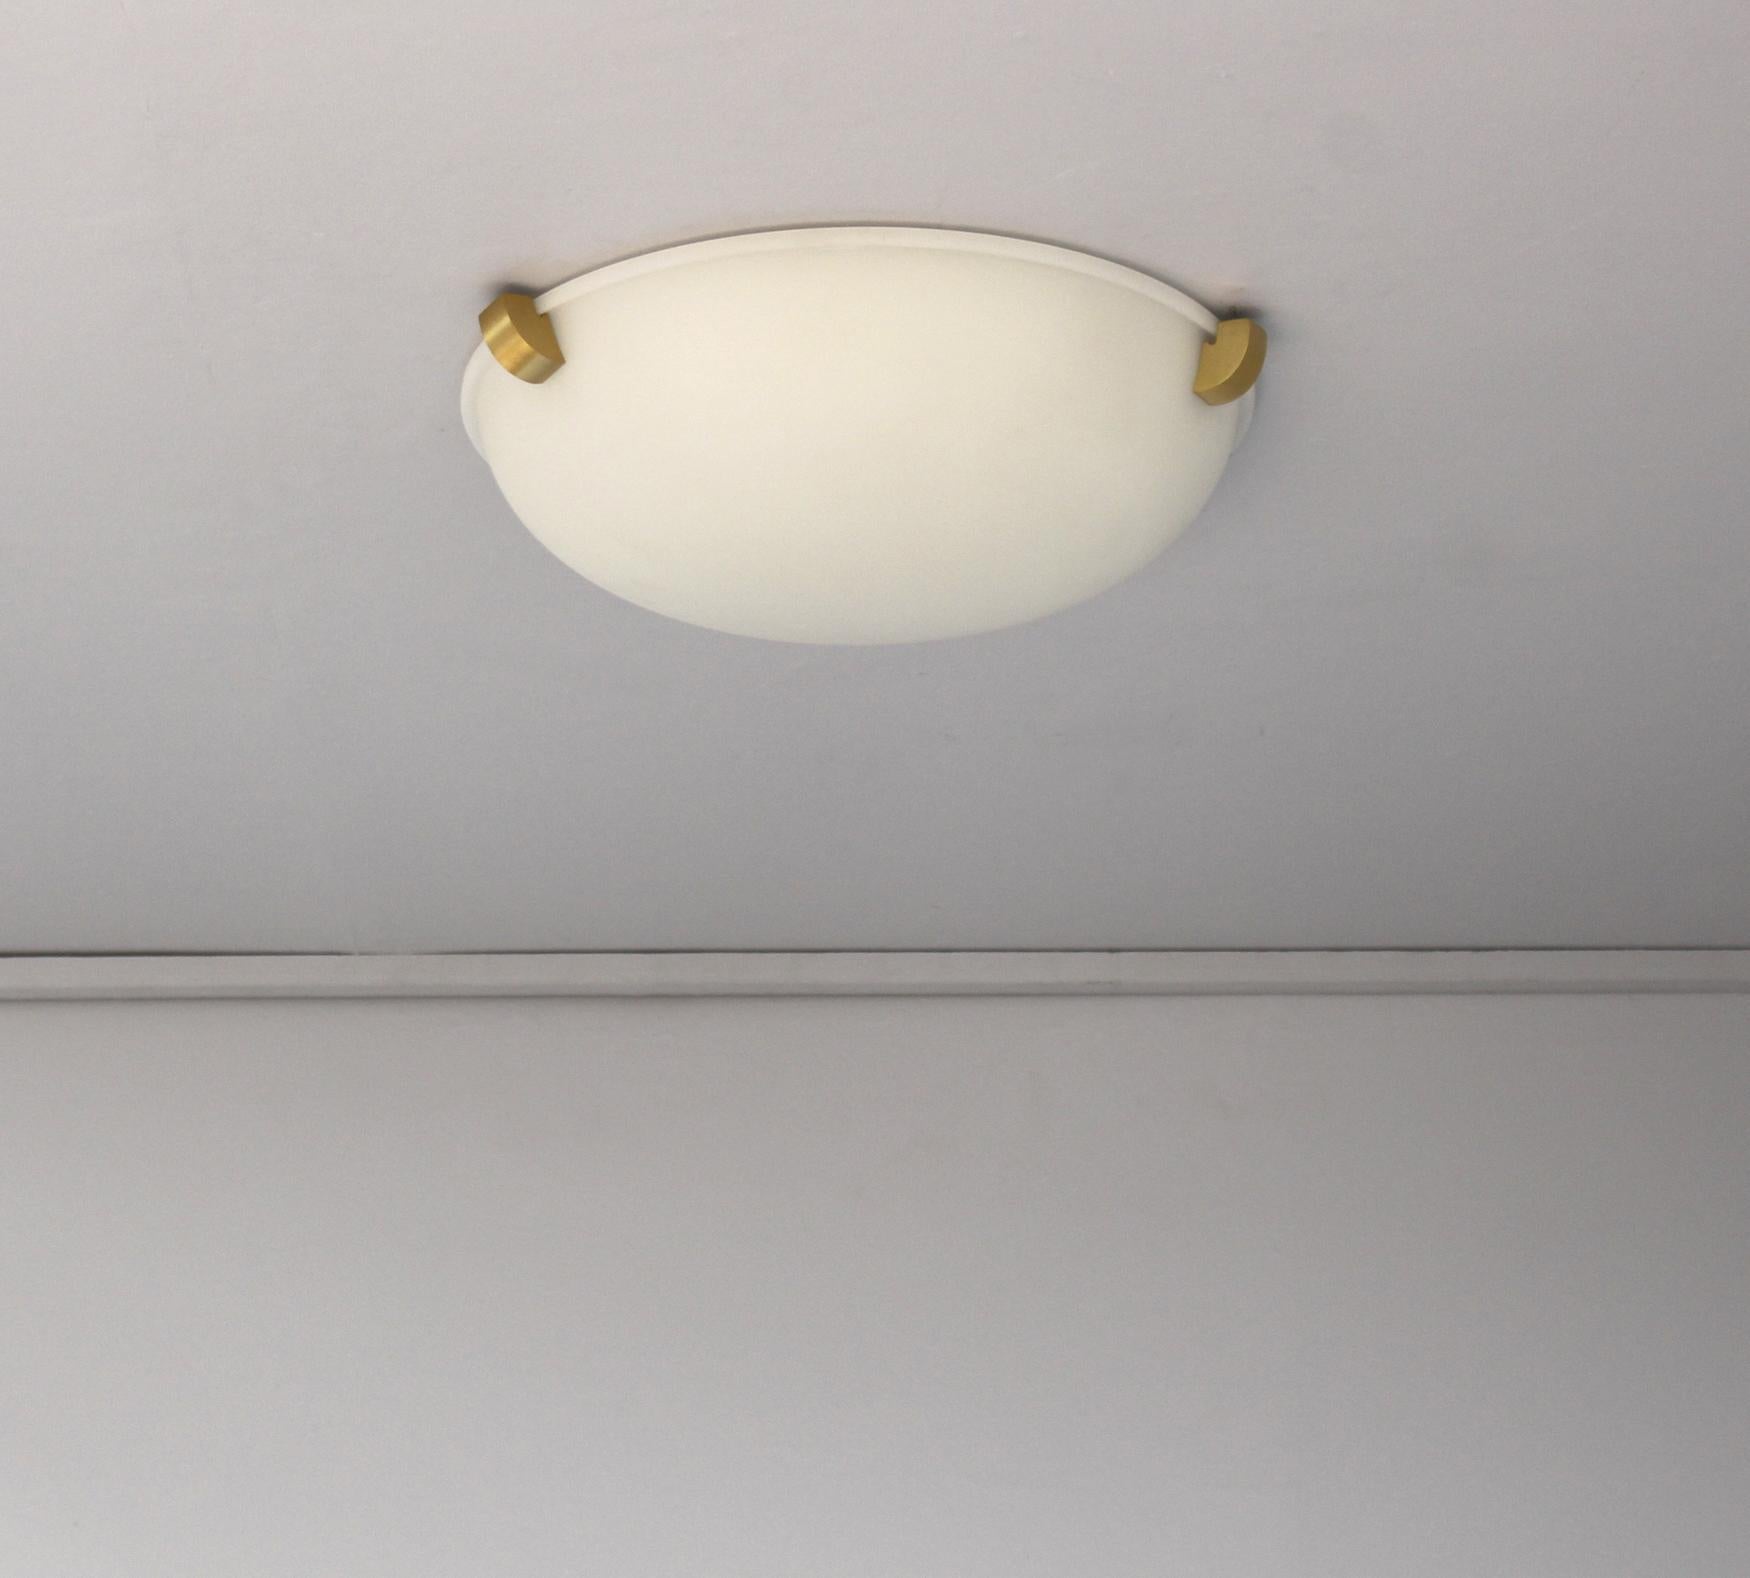 Jean Perzel - A fine French Art Deco flush mount ceiling fixtures or wall light with a round fluted frosted glass shade supported by three bronze studs.